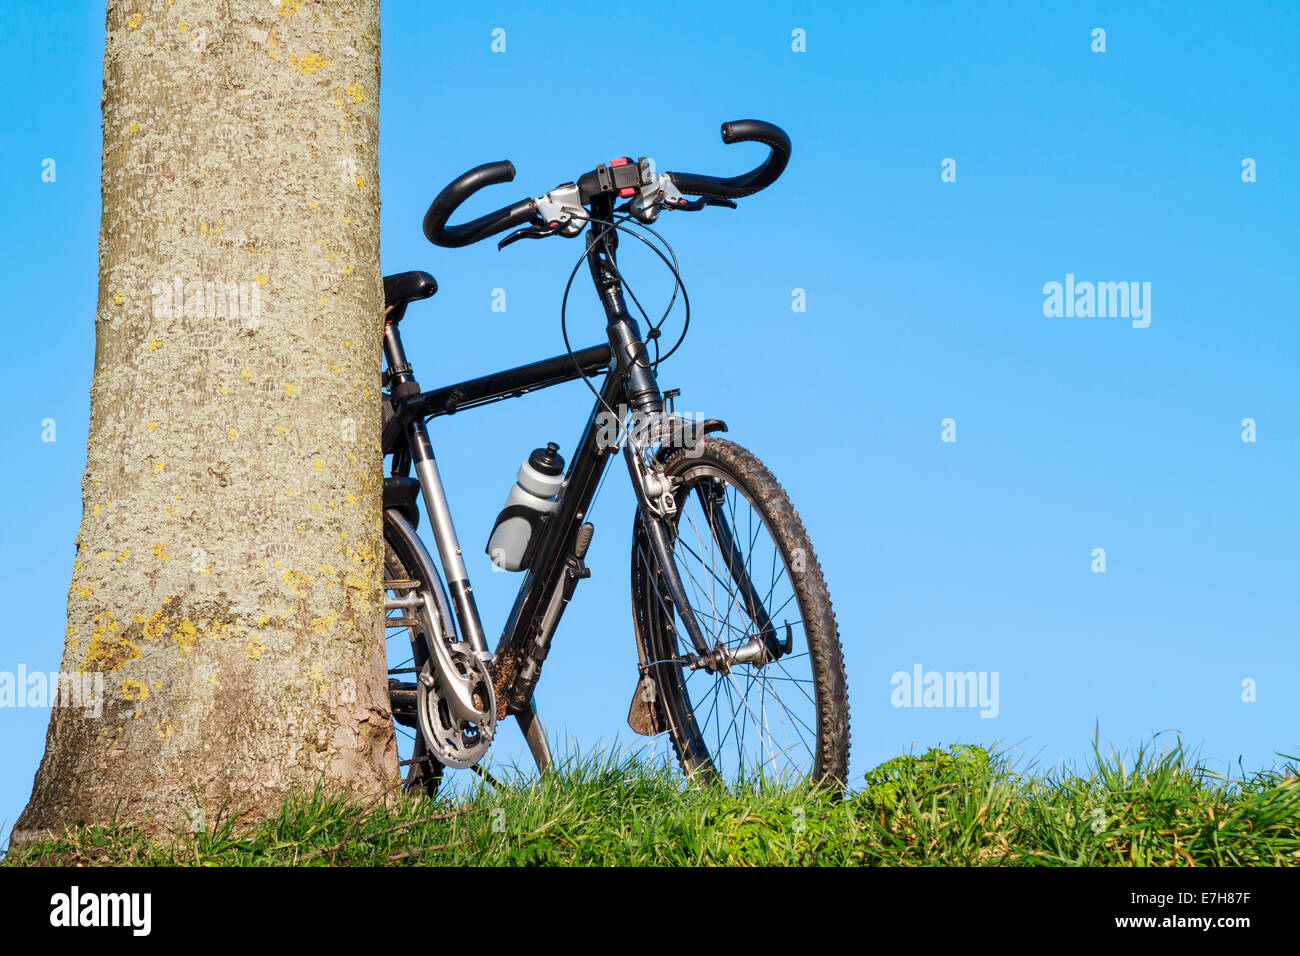 Trekking bike leaning against a tree with blue sky background Stock Photo -  Alamy